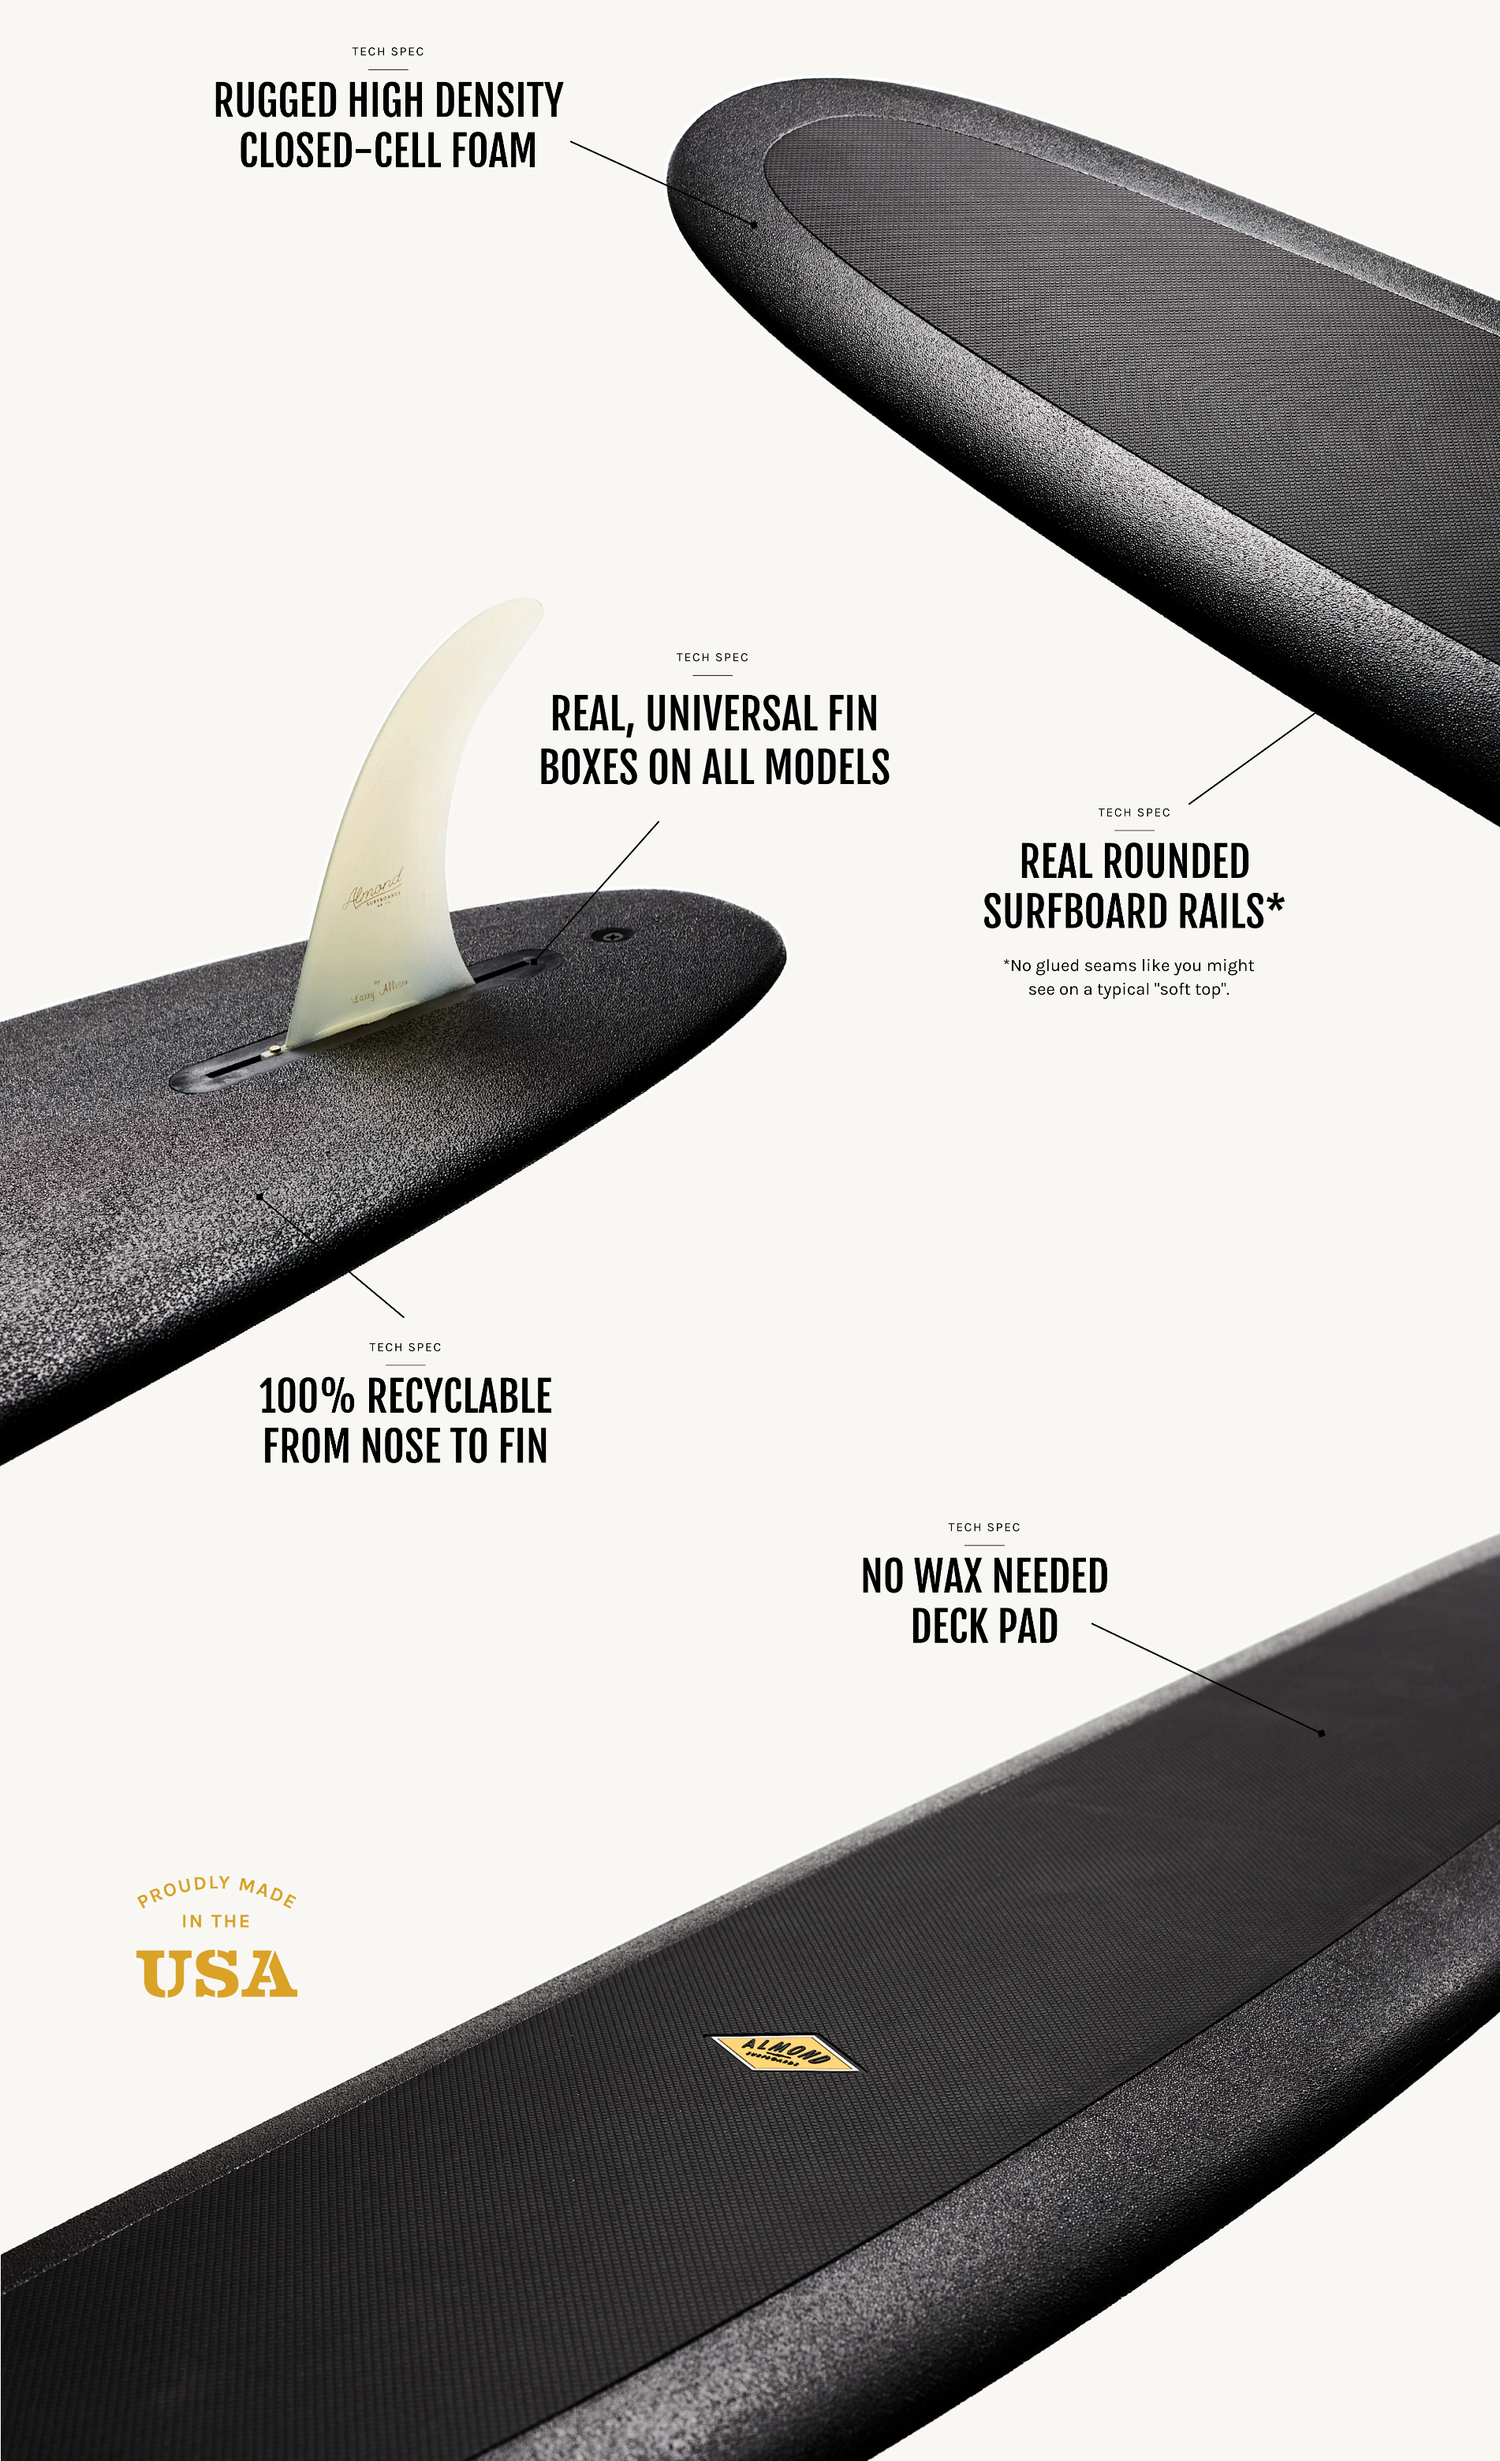 Almond Surfboards R-Series Recyclable Closed-Cell Foam Affordable and Durable Surfboards. Brief product features.